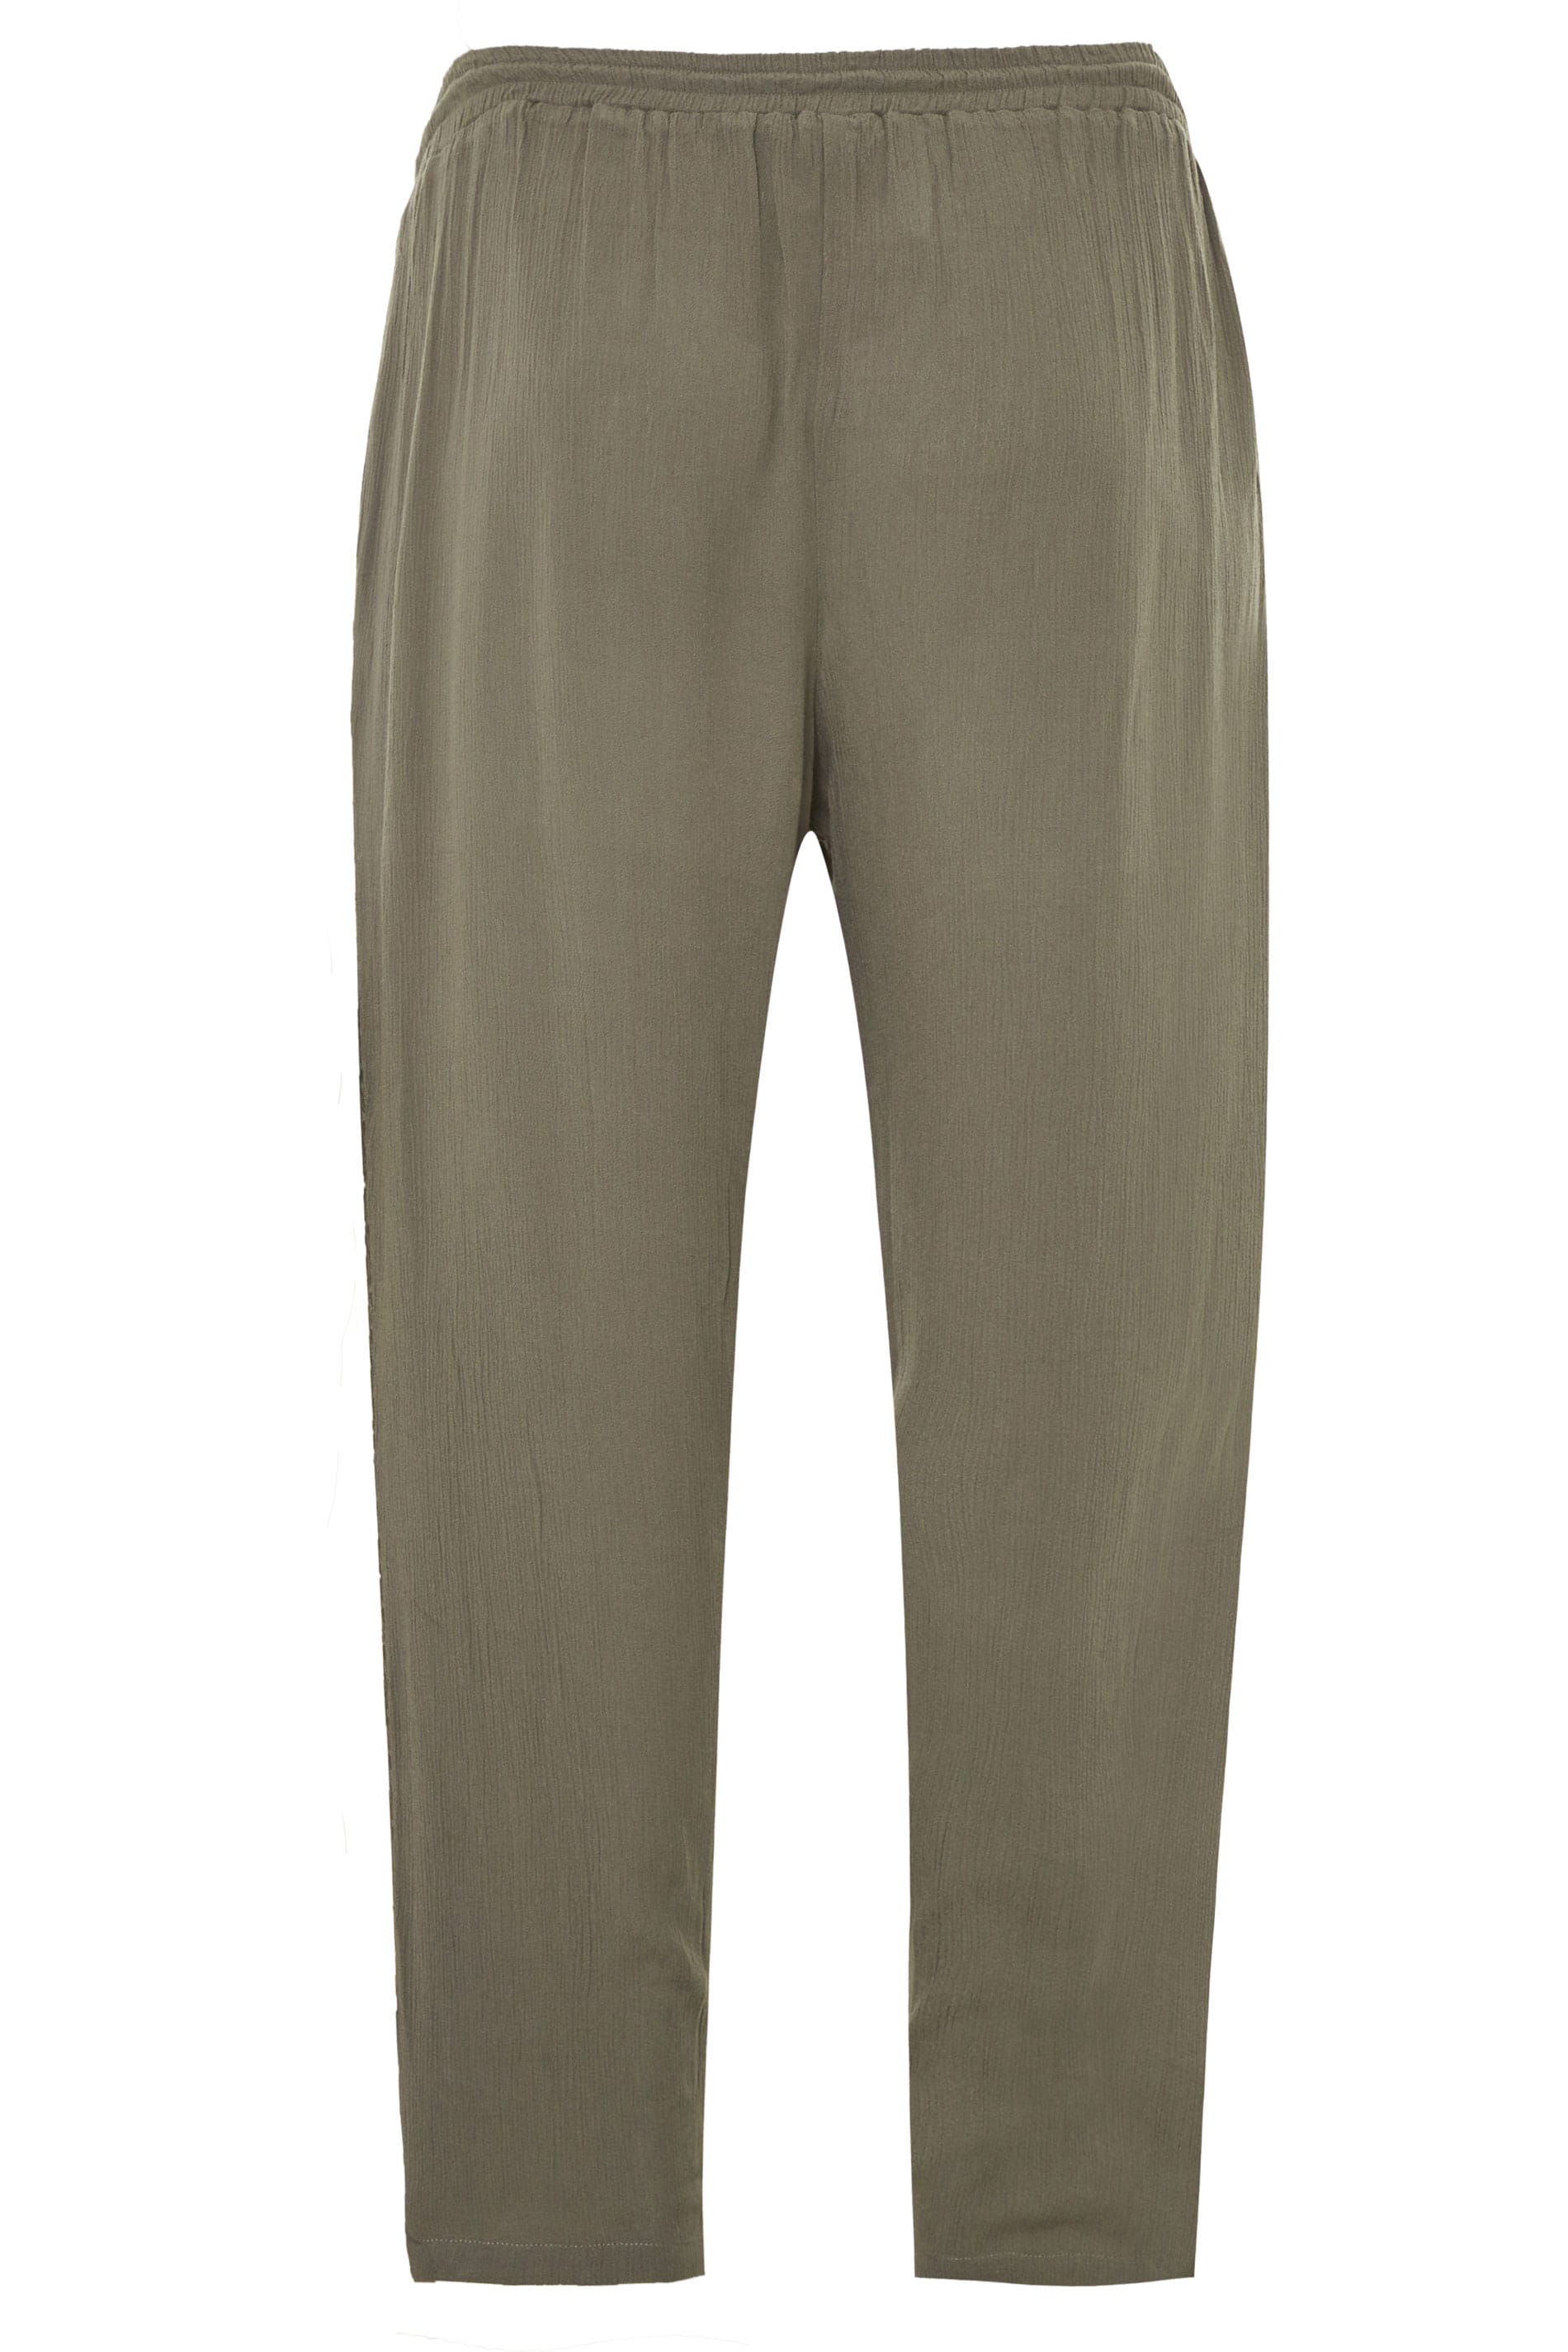 Khaki Crinkle Embroidered Tapered Trousers | Yours Clothing